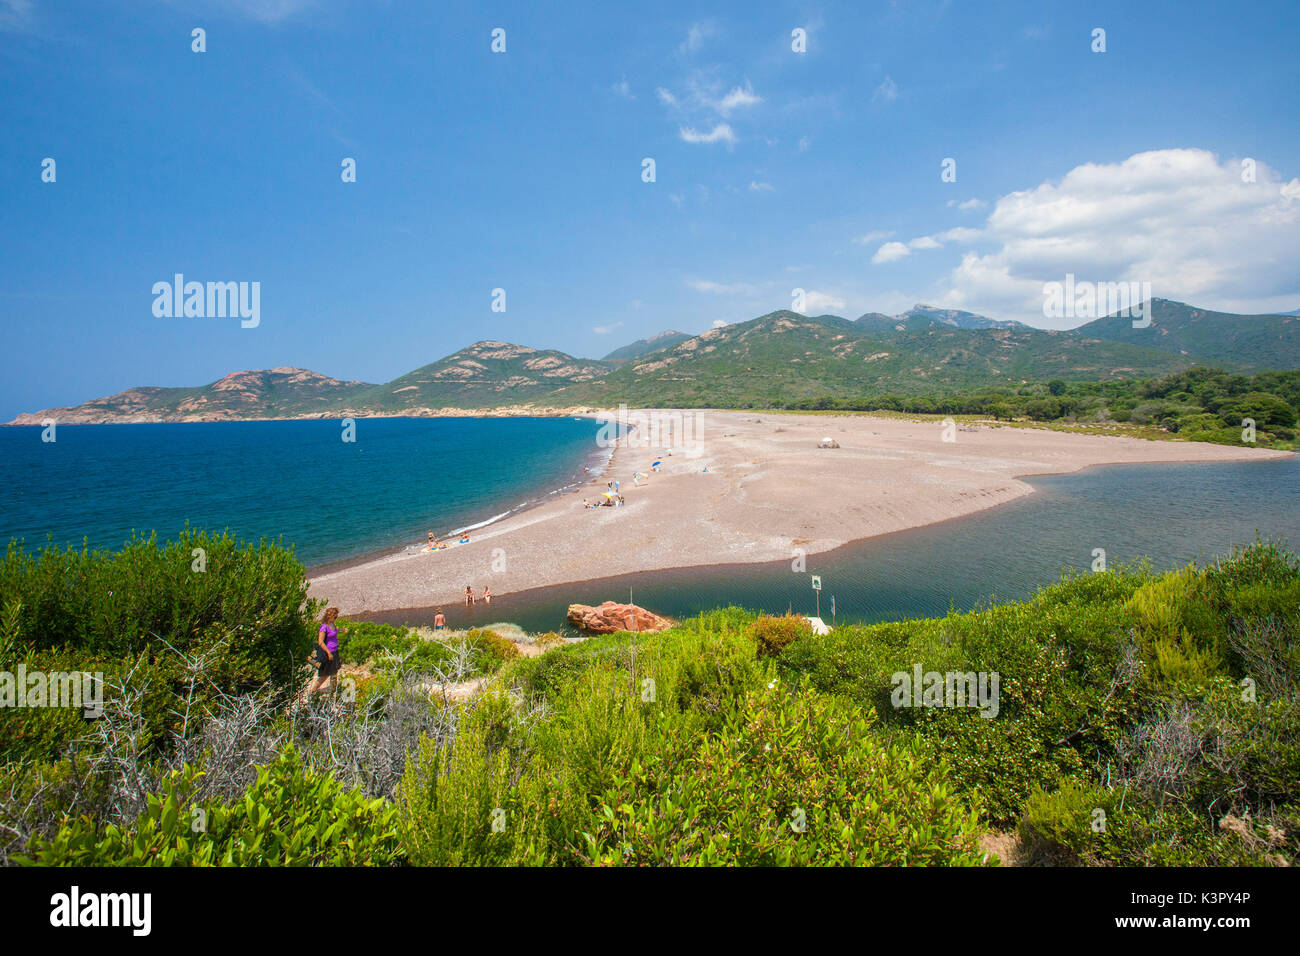 Turquoise sea and beach framed by green vegetation in summer Porto Southern Corsica France Europe Stock Photo